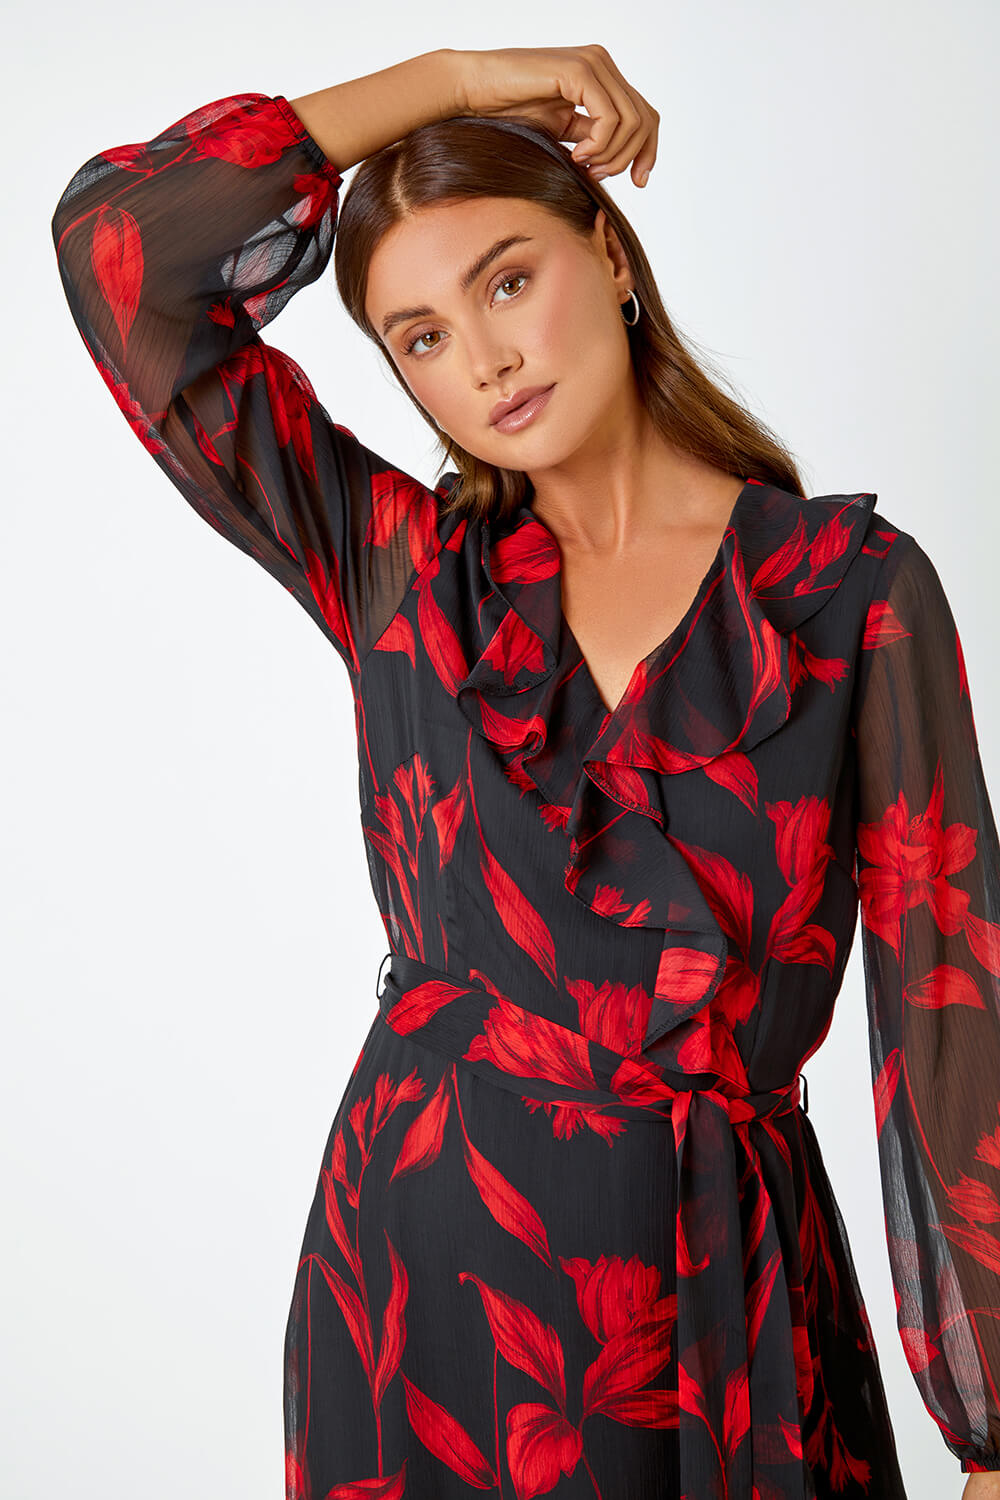 Red Floral Chiffon Frill Wrap Dress, Image 4 of 5